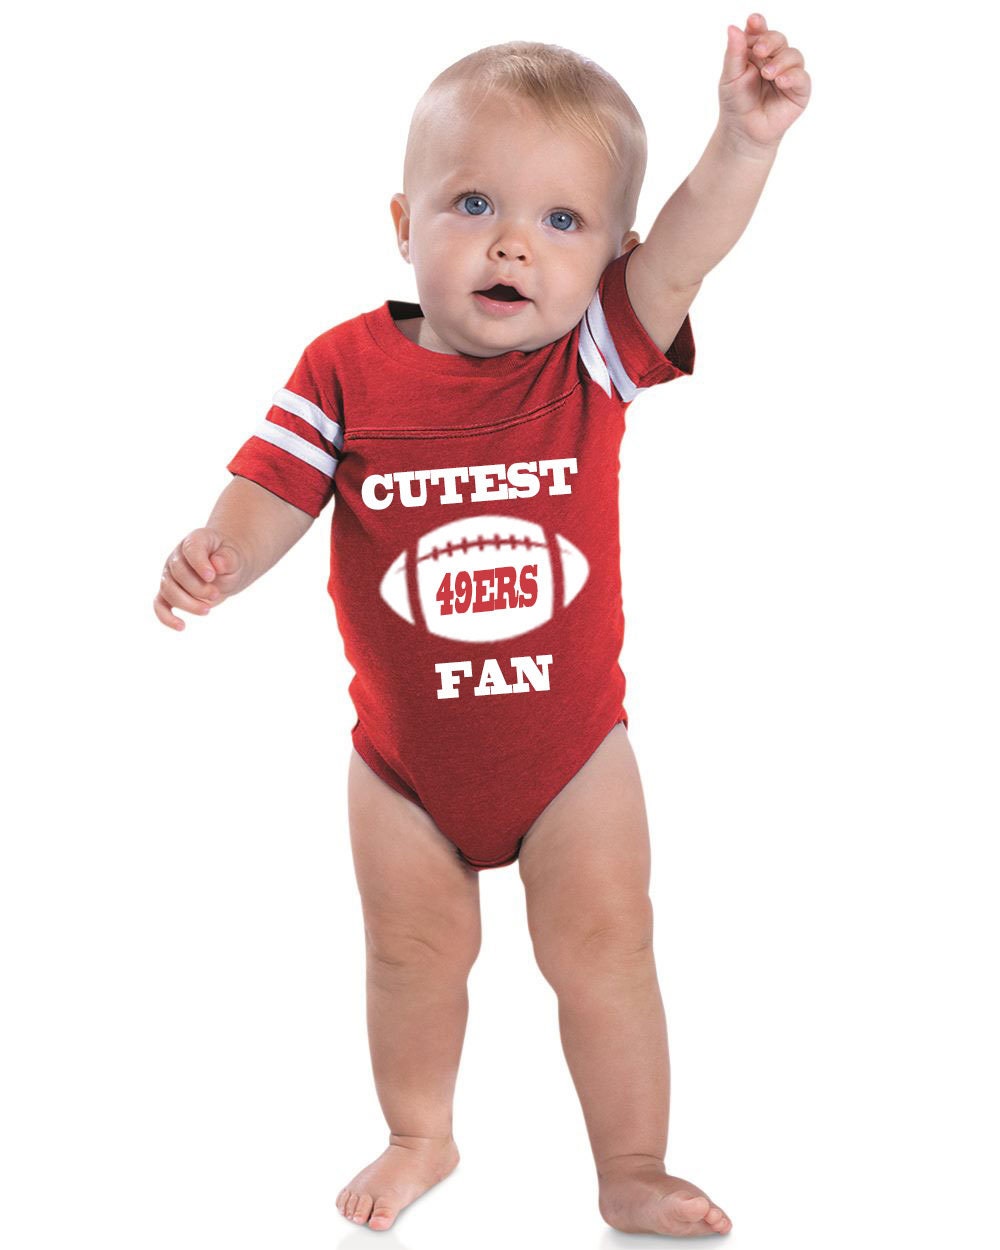 Cutest 49ERS Fan A Custom Red and White Football Jersey Baby